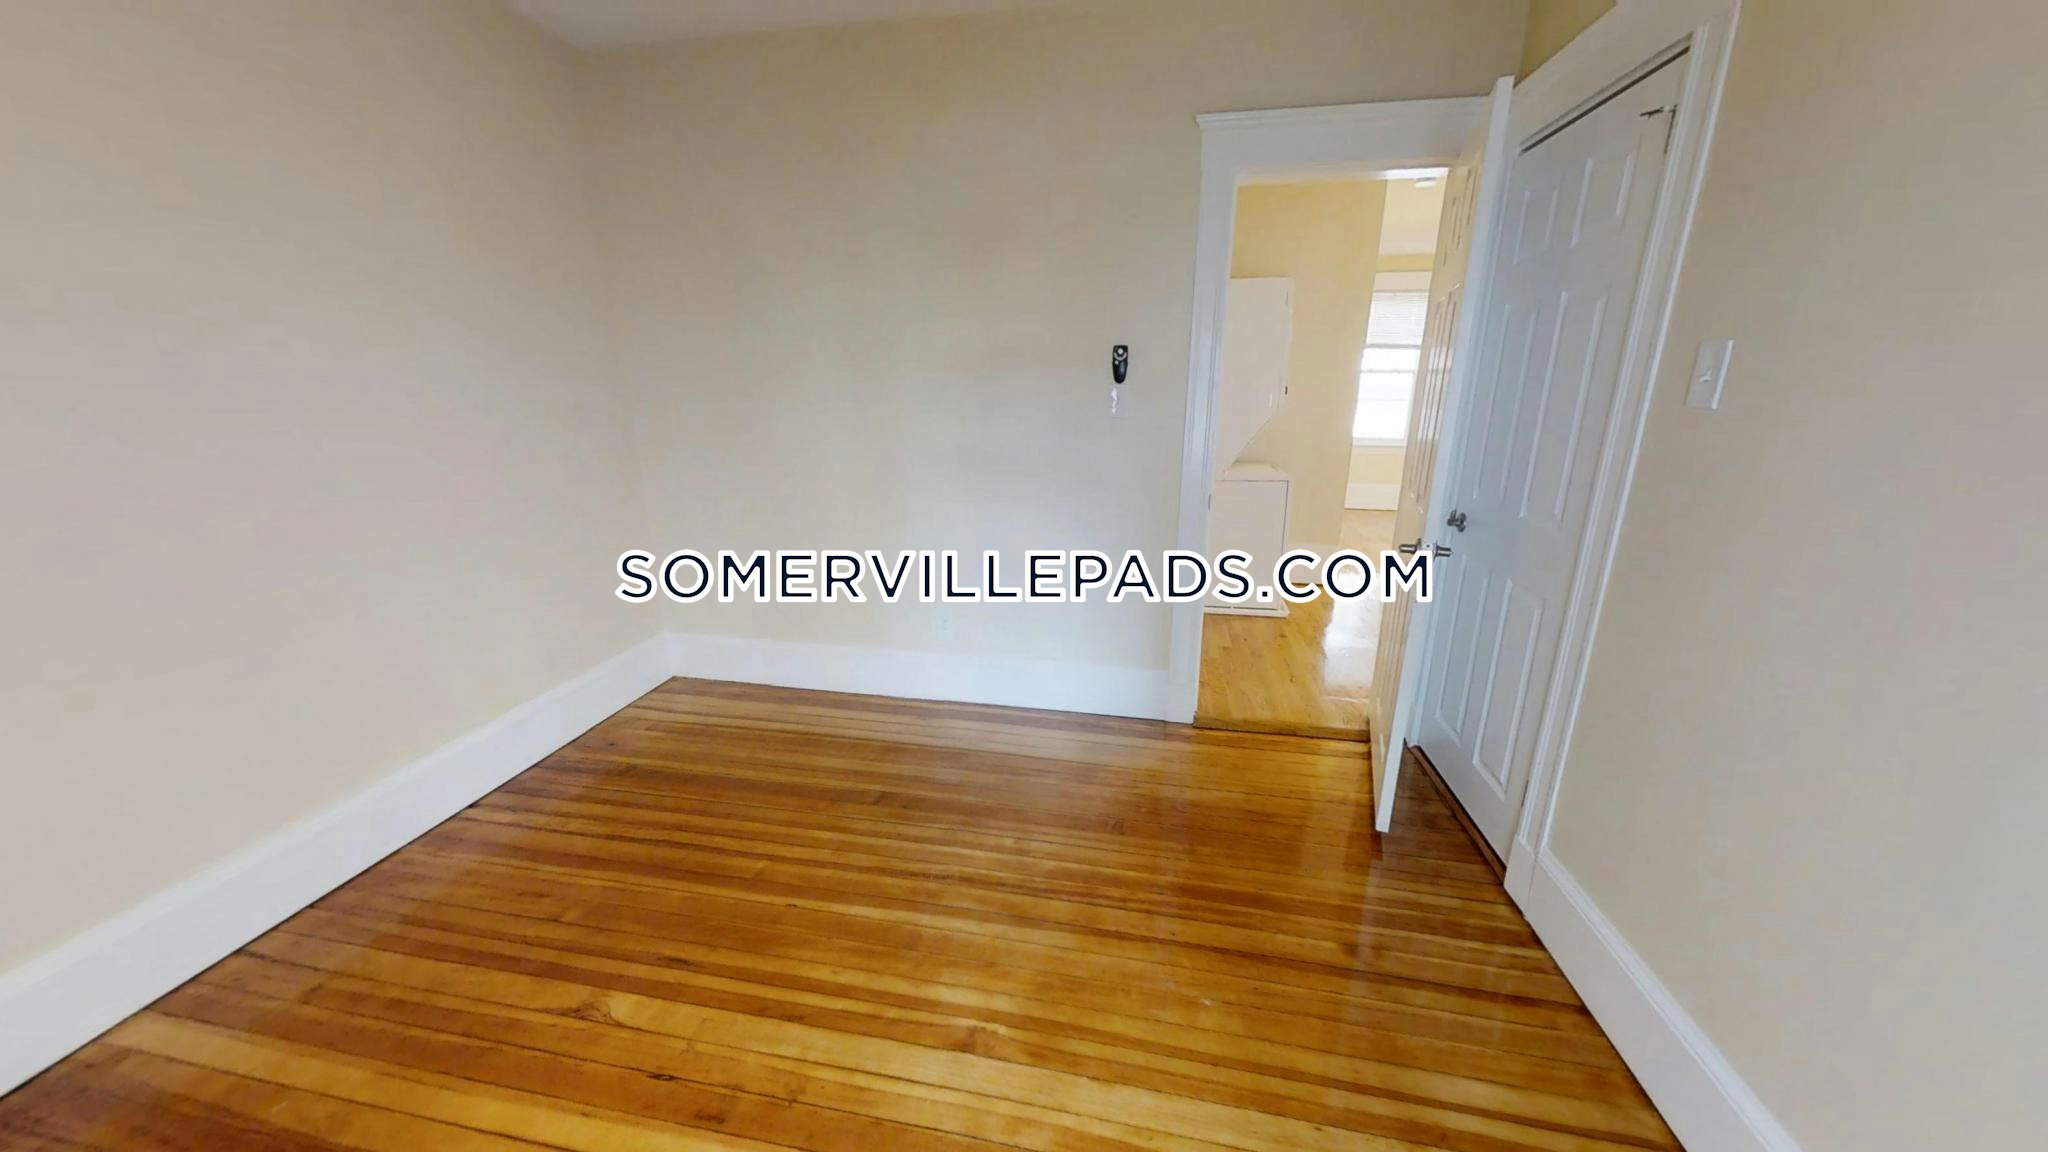 Simple Apartments For Rent Davis Square Somerville with Simple Decor